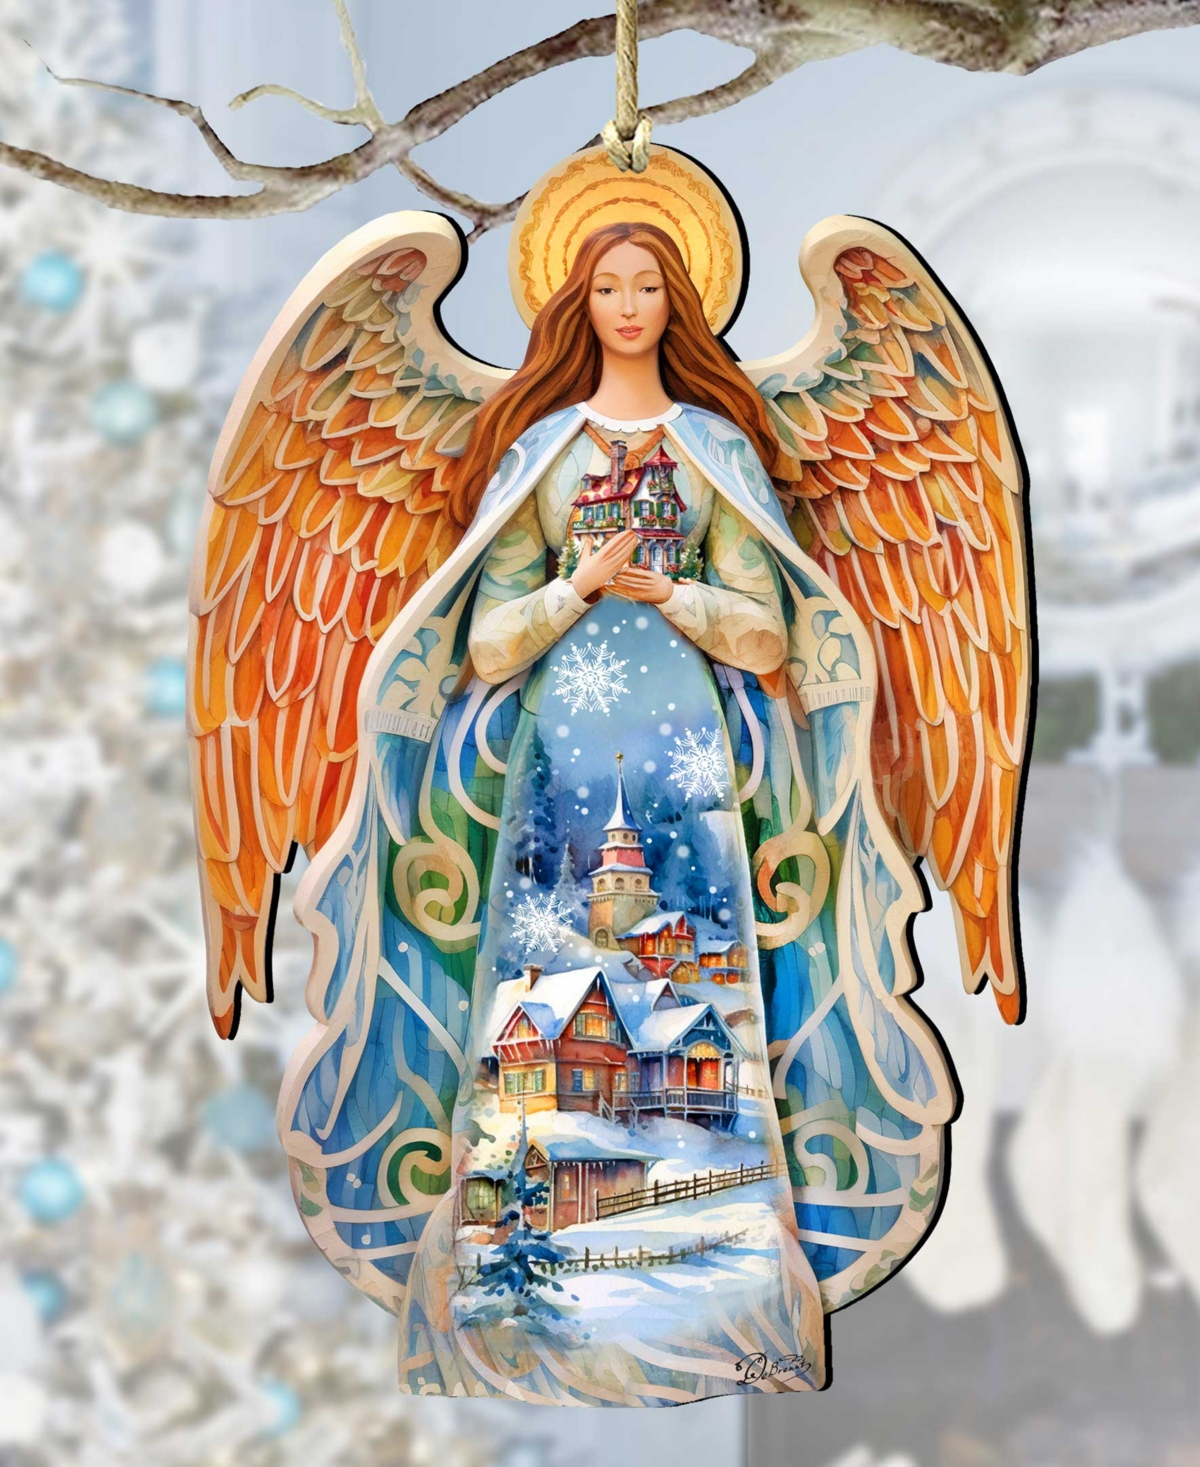 Designocracy Blessing Home Angel Christmas Wooden Ornaments Holiday Decor G. Debrekht In Multi Color